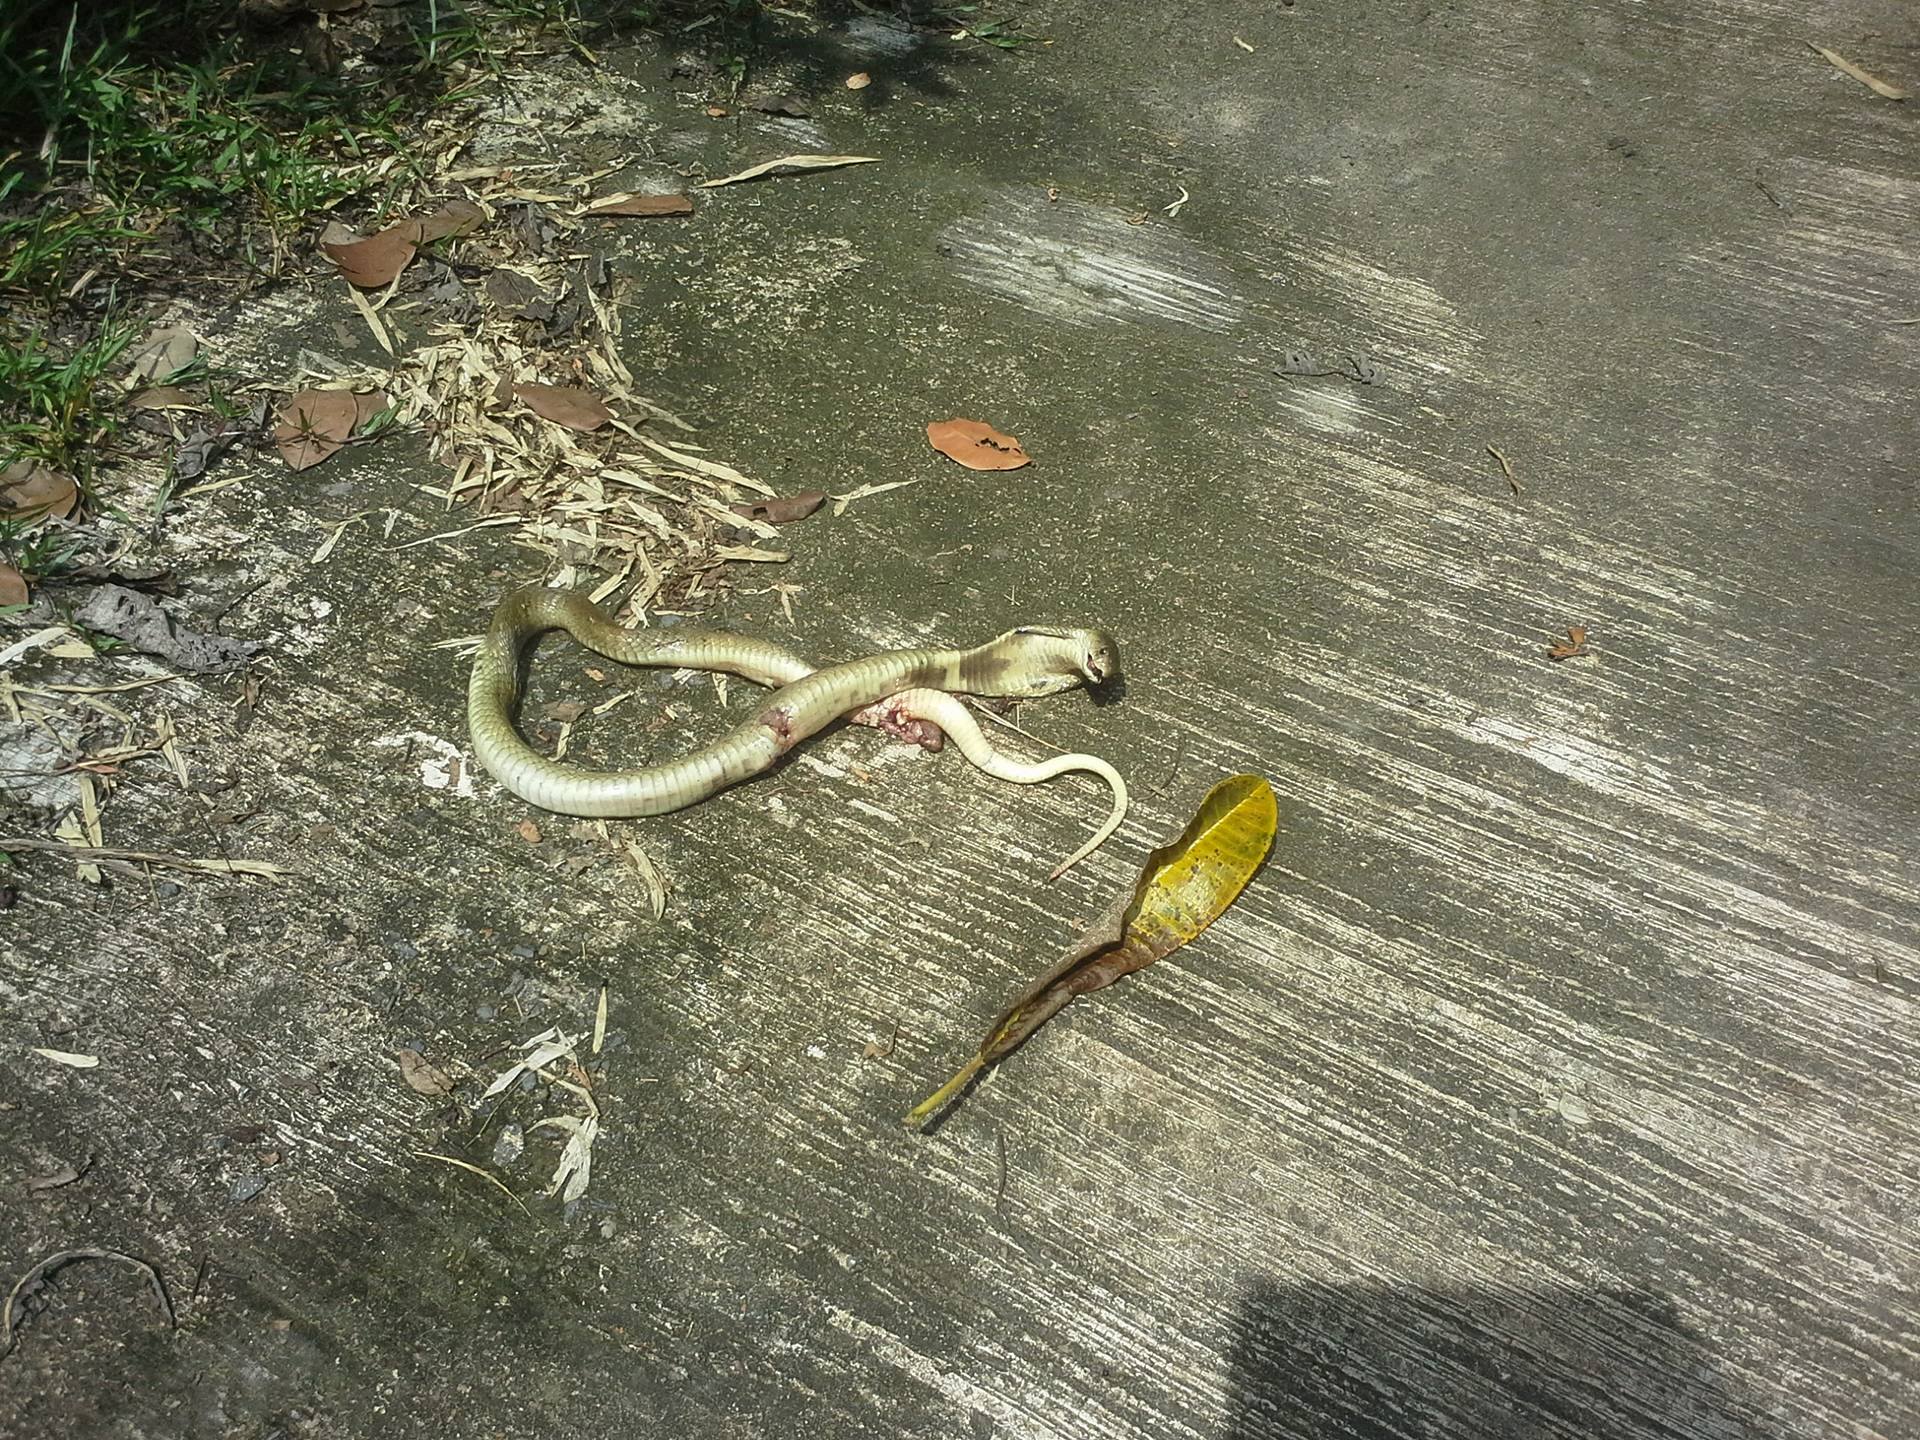 Dead monocled cobra after Thai hit it with shovel.